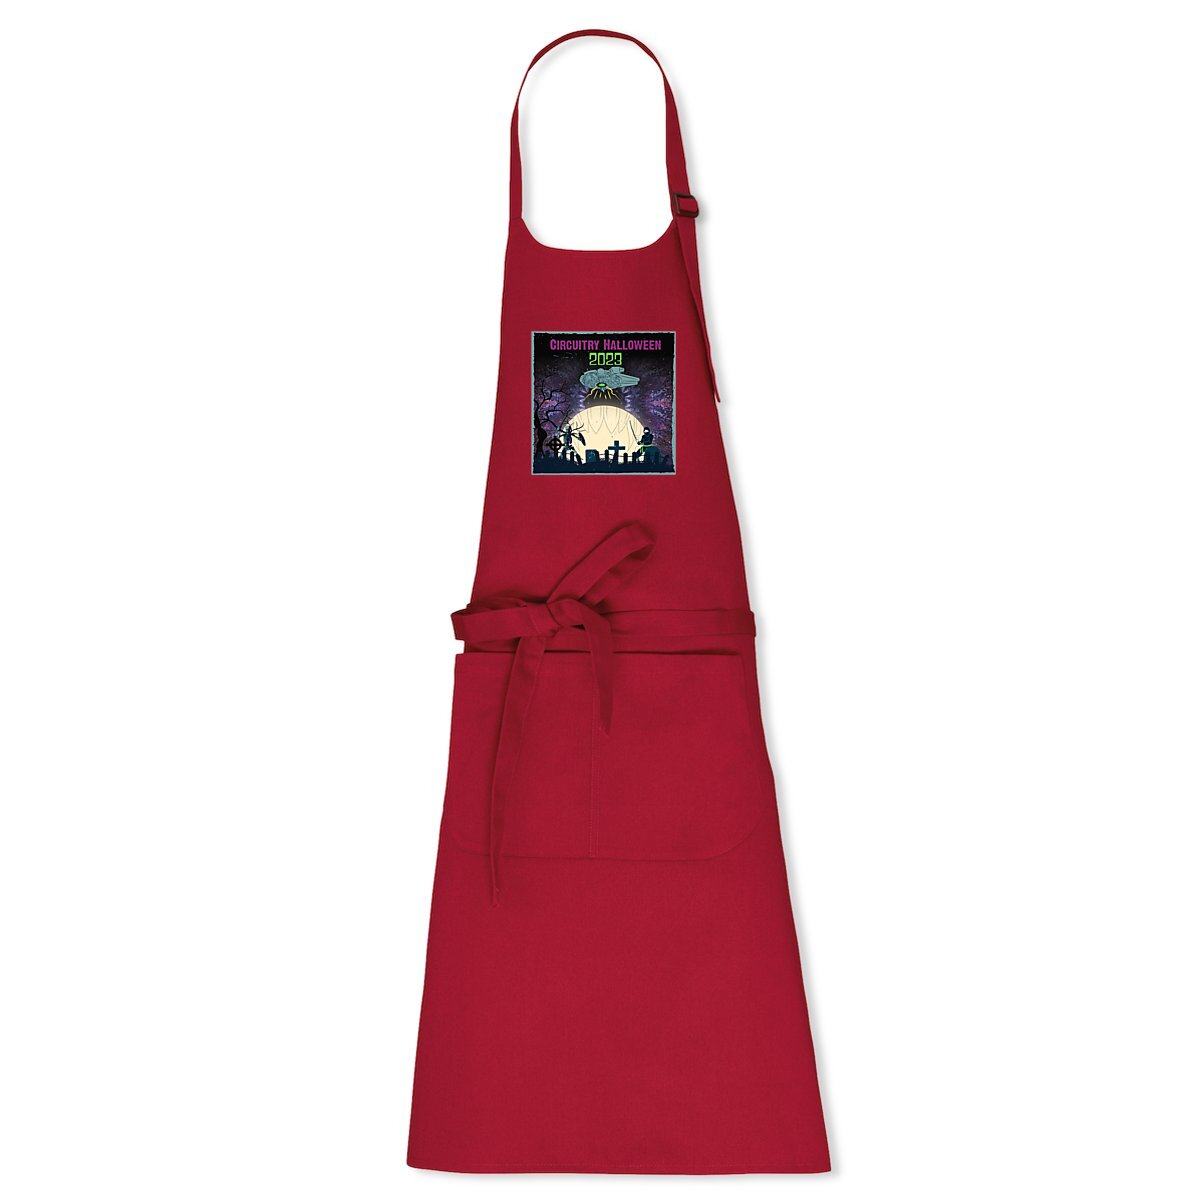 Circuitry Halloween 2023 Apron (Limited Edition)